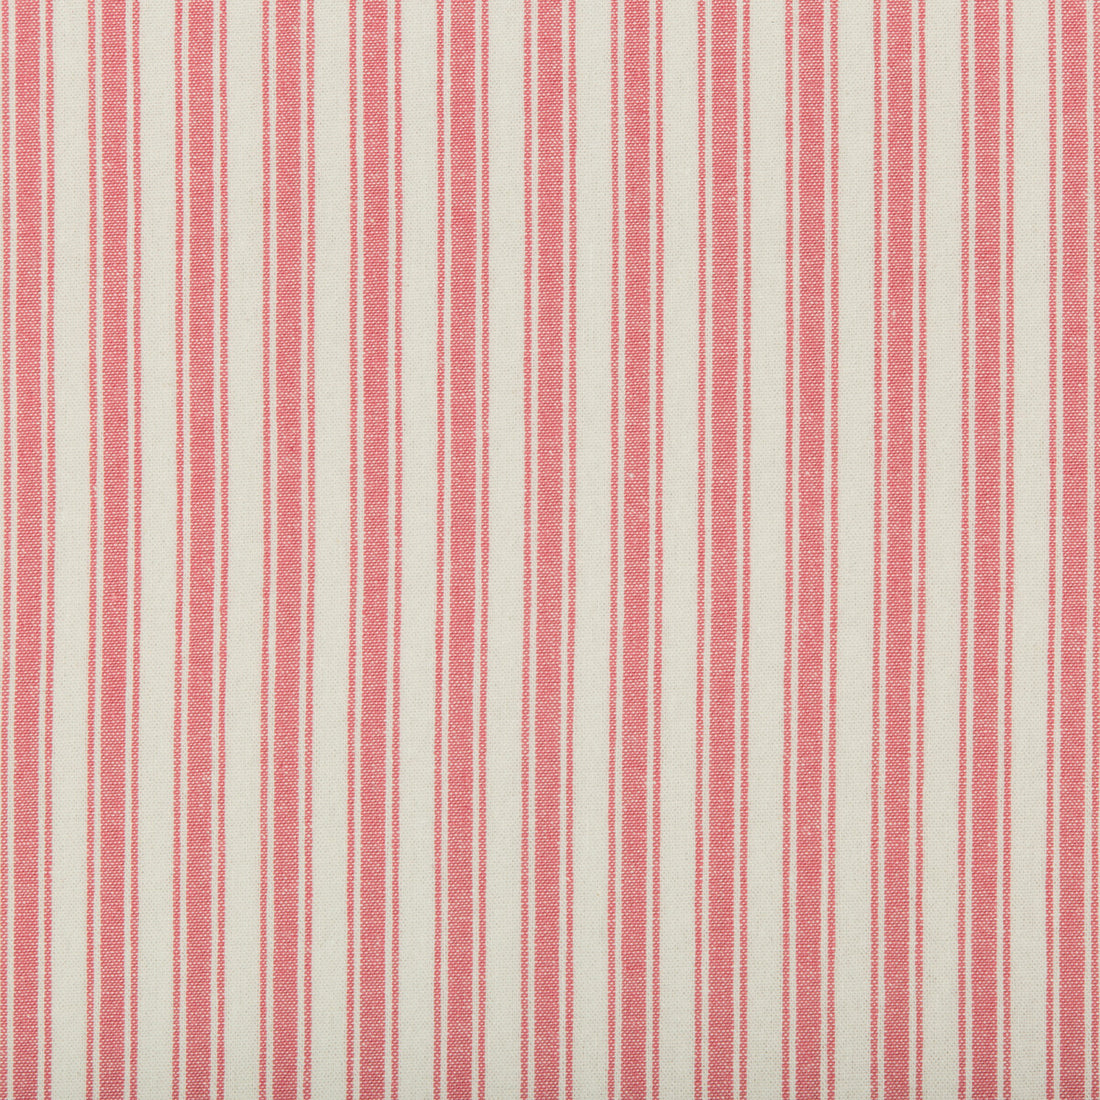 Seastripe fabric in geranium color - pattern 35542.19.0 - by Kravet Basics in the Bermuda collection